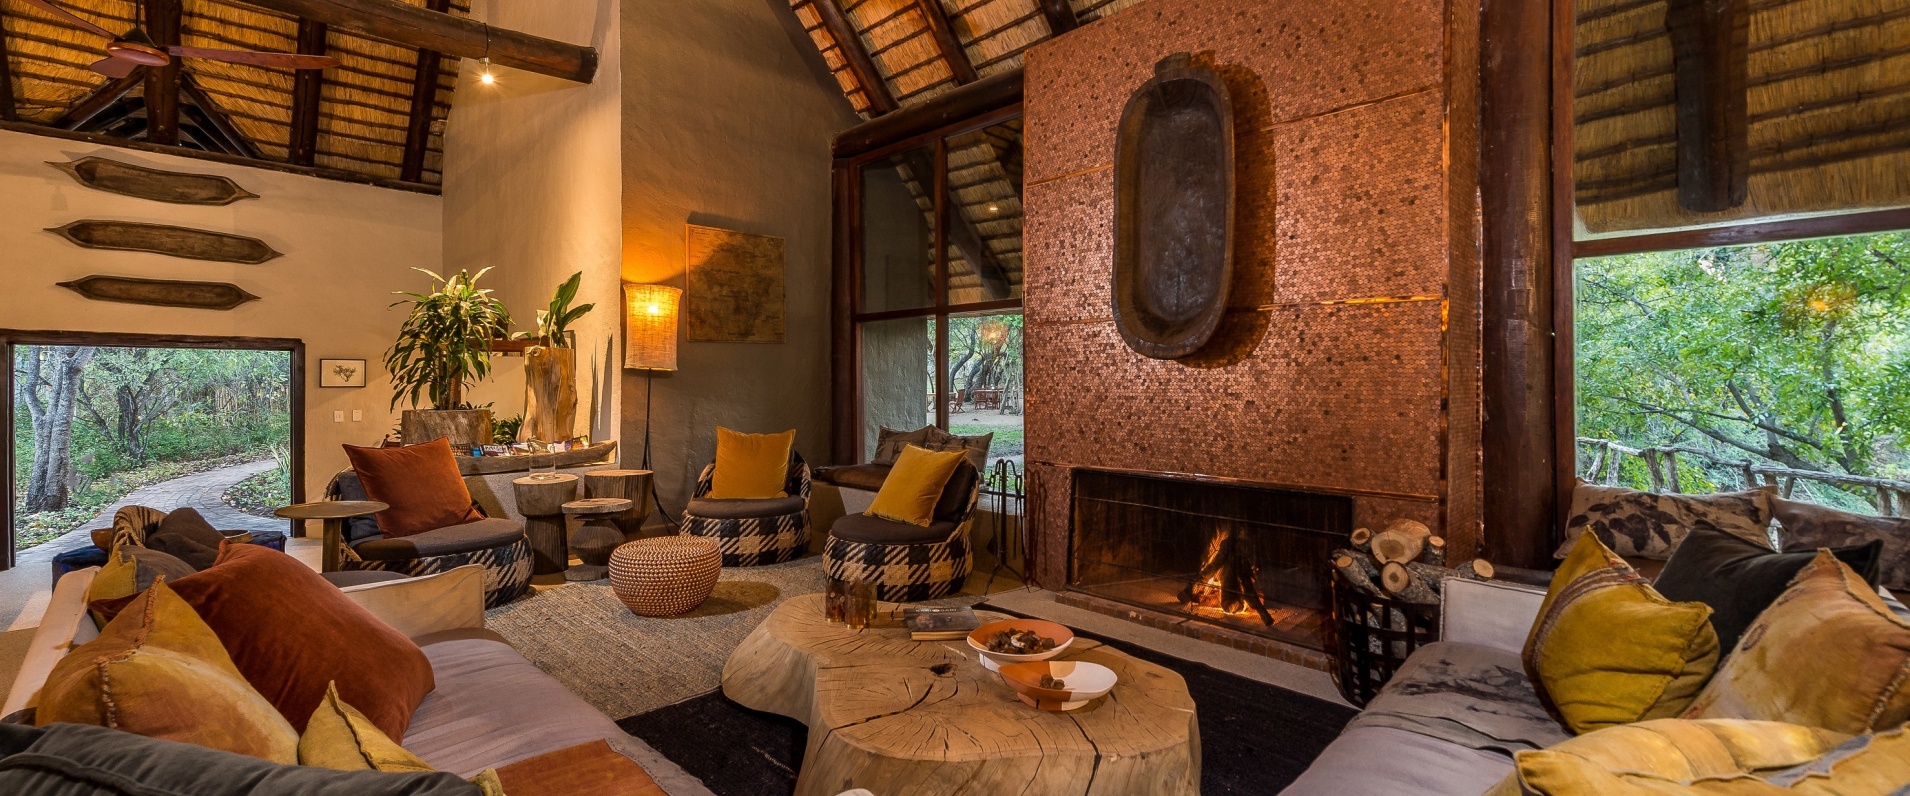 Enjoy the opulent comfort of Sabi Sabi's Bush Lodge, where every detail echoes the feeling of home.